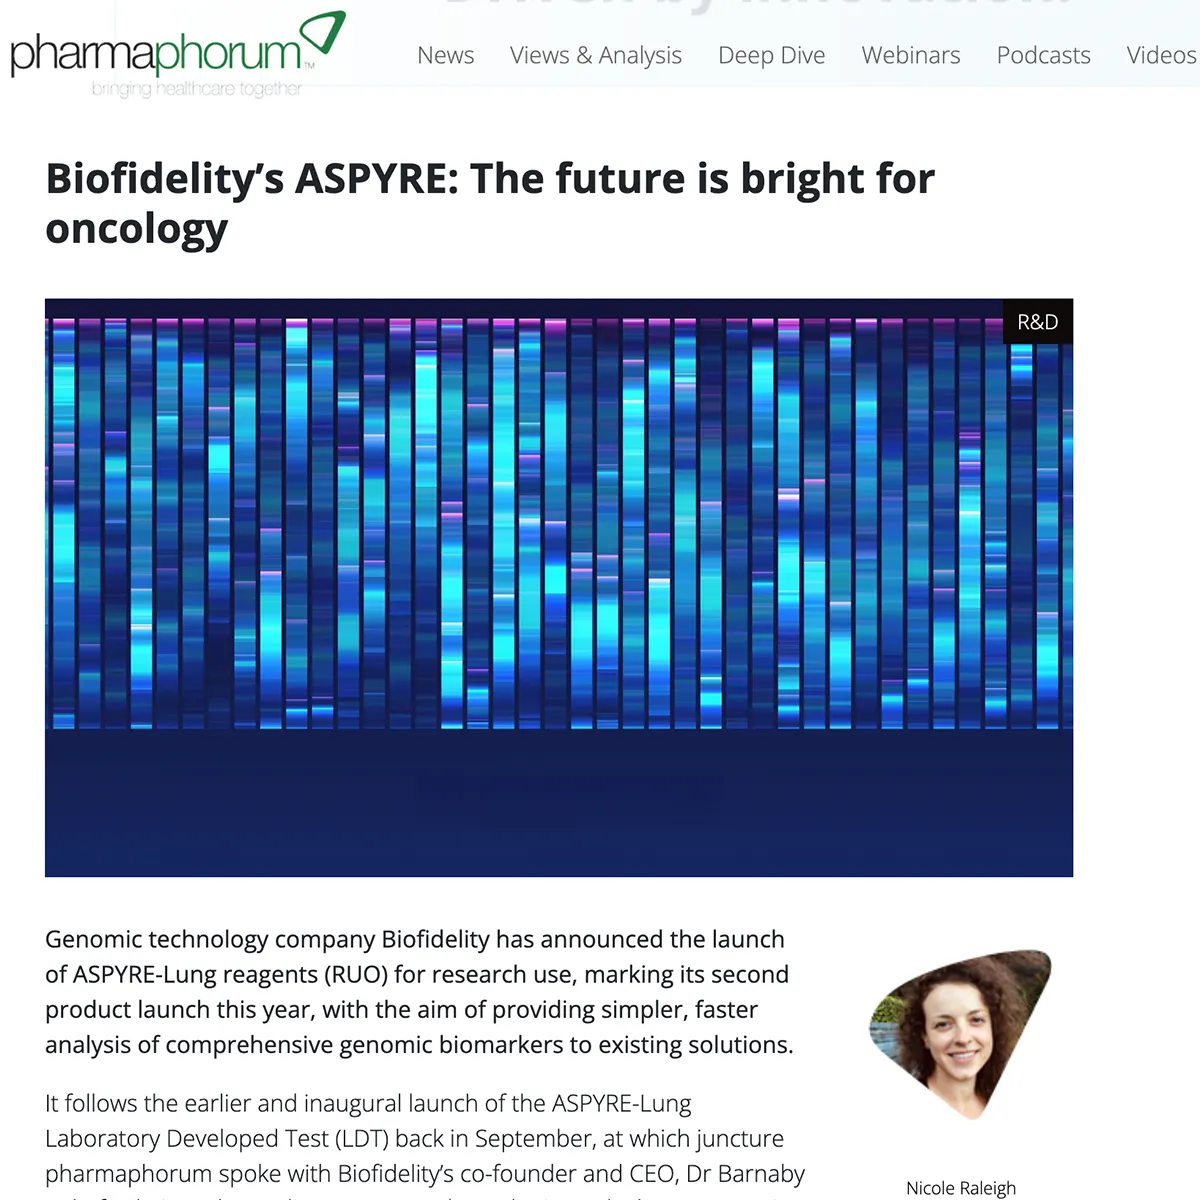 Biofidelity’s ASPYRE: The future is bright for oncology